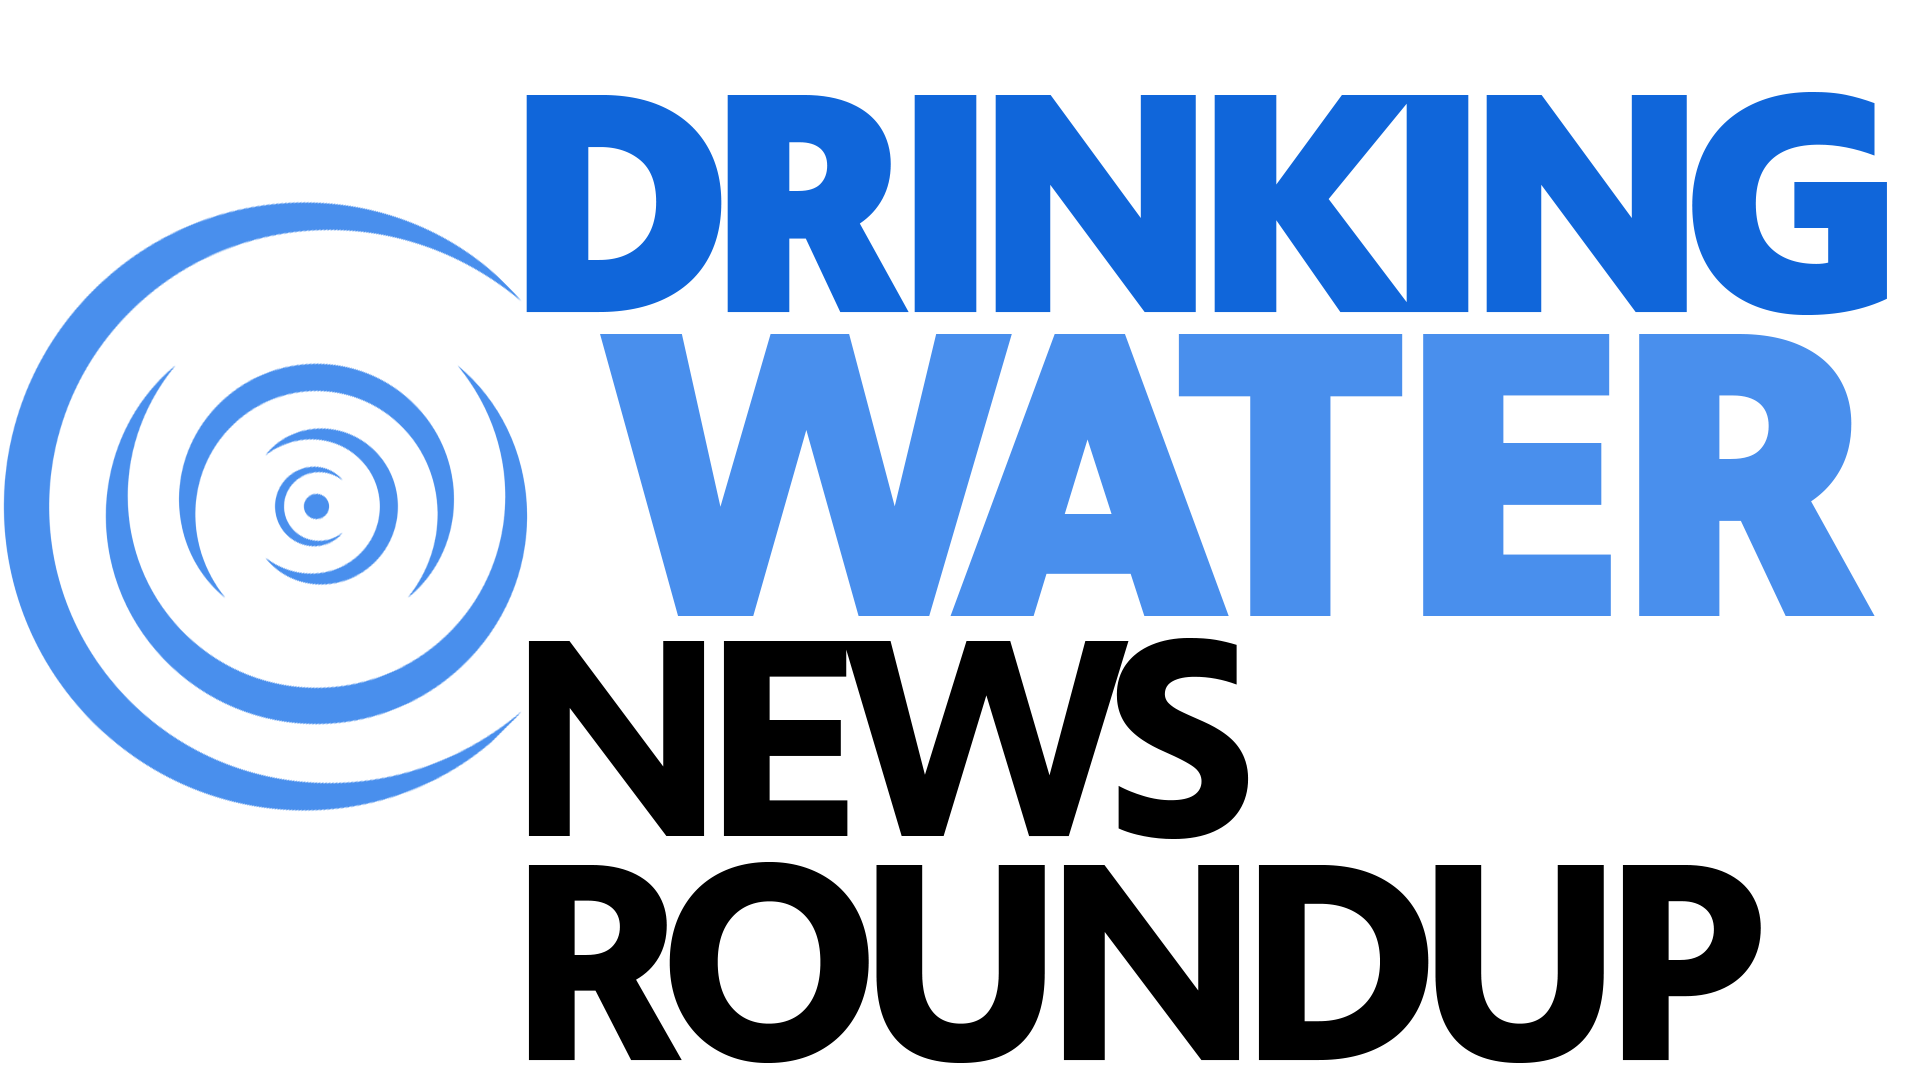 Drinking Water News Roundup: Steps to ensure safe drinking water, Indigenous business leaders raise awareness